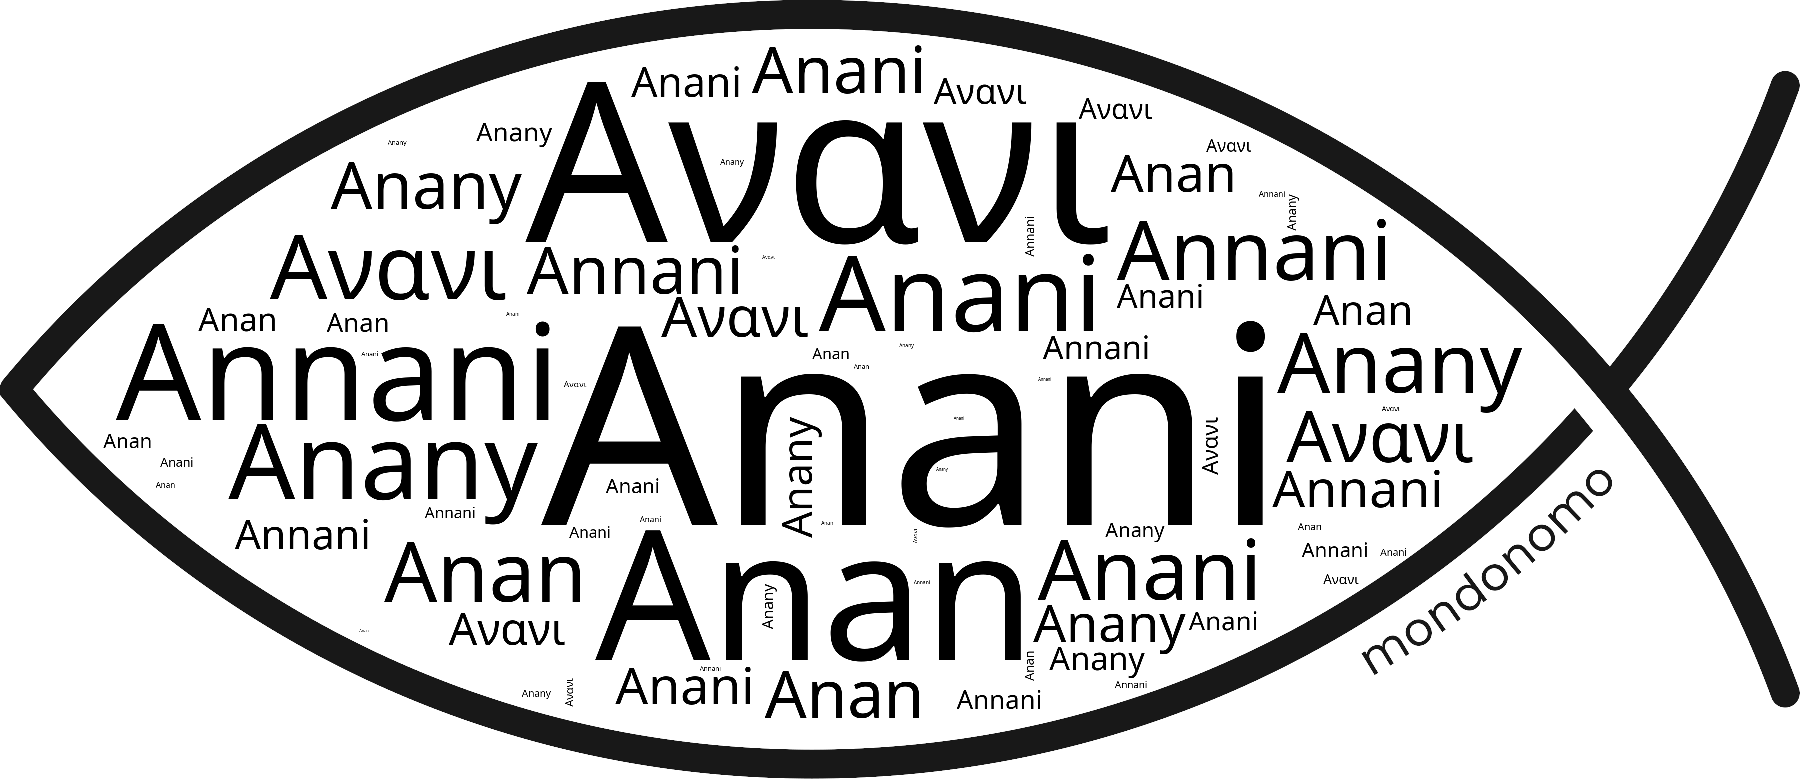 Name Anani in the world's Bibles